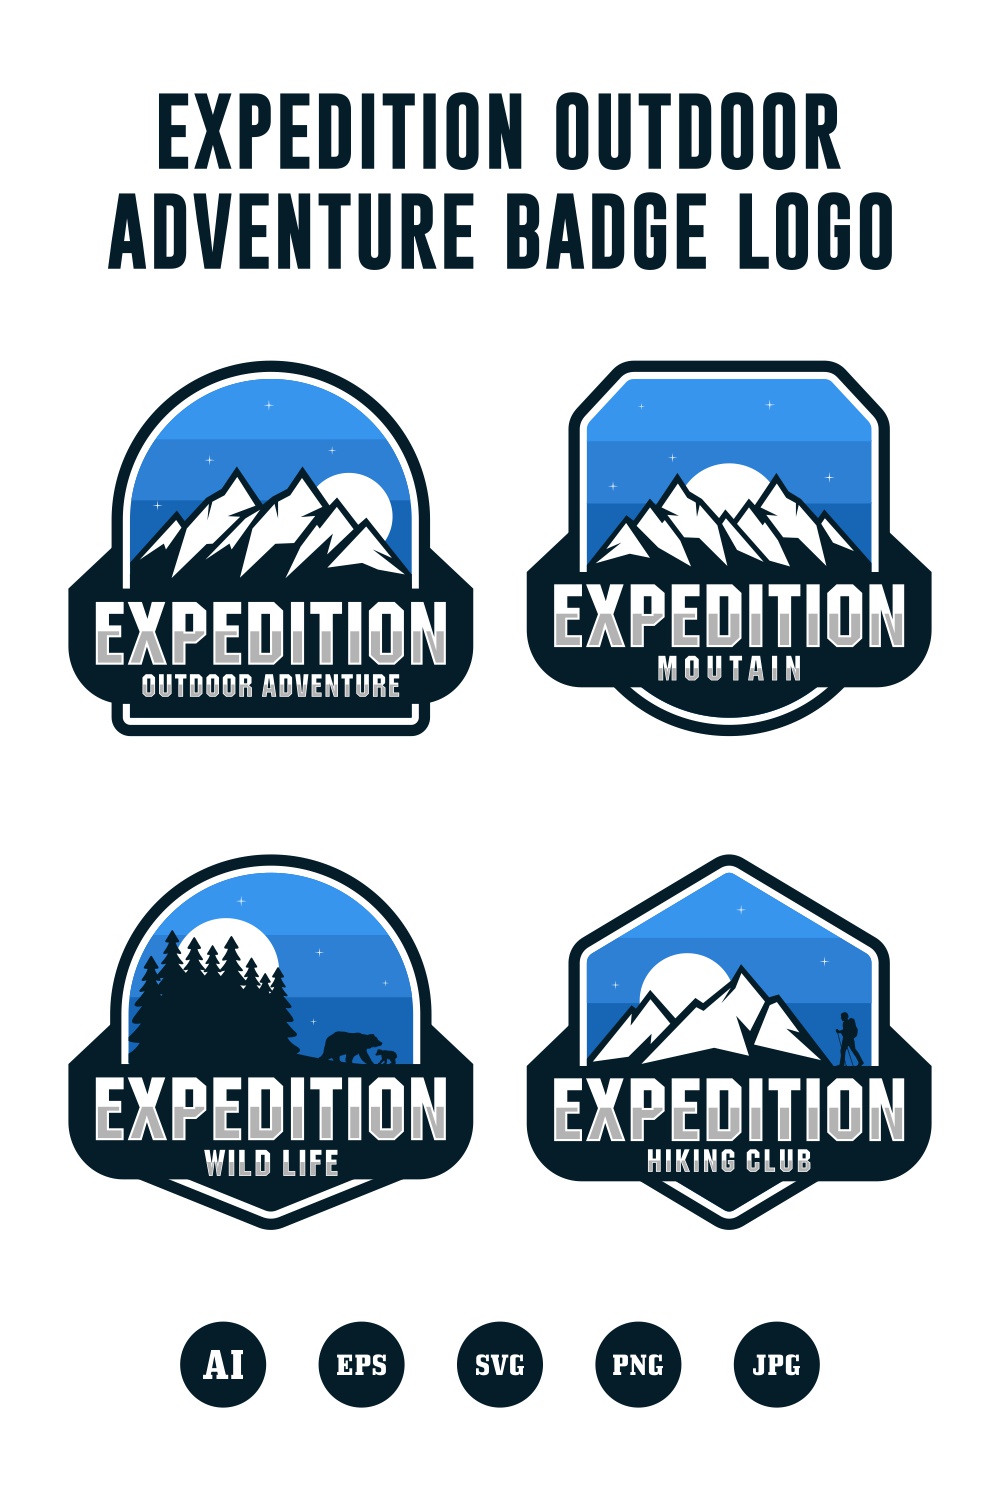 Set Expedition outdoor adventure badge design collection - $4 pinterest preview image.